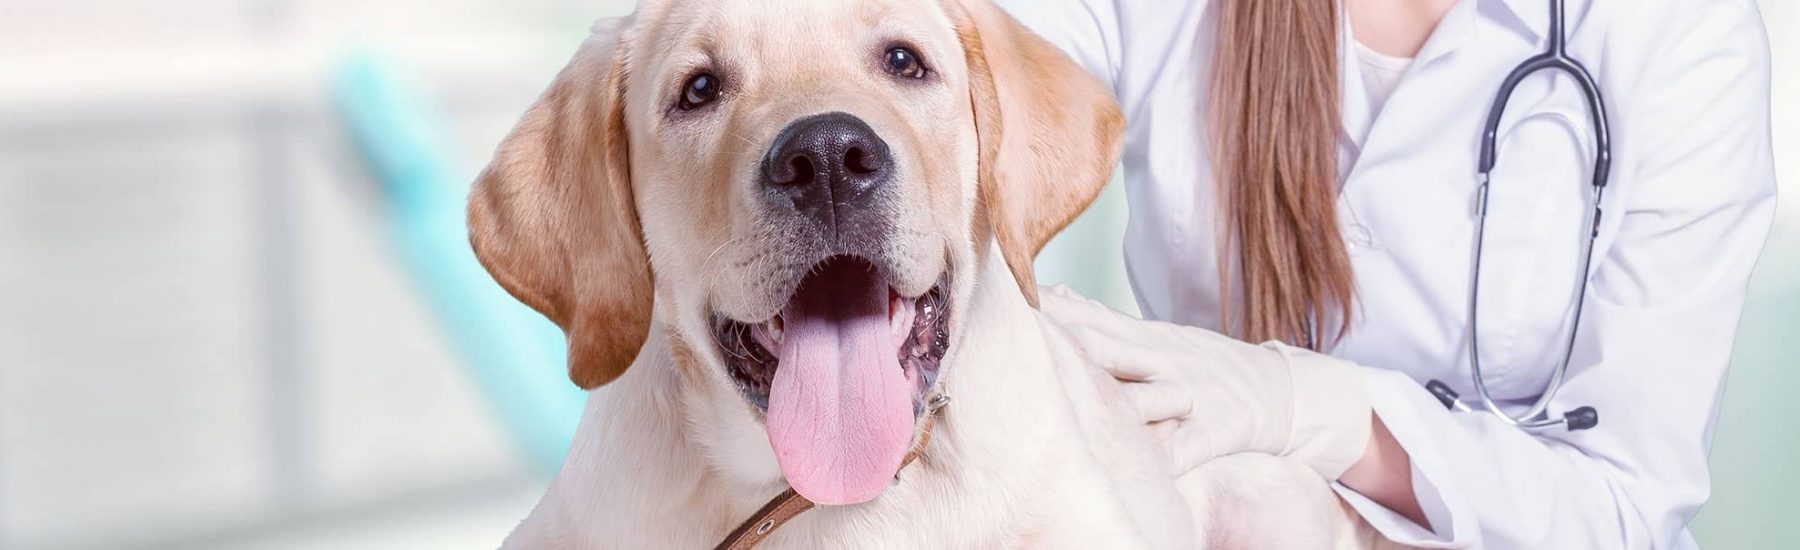 A lab dog with their tongue out